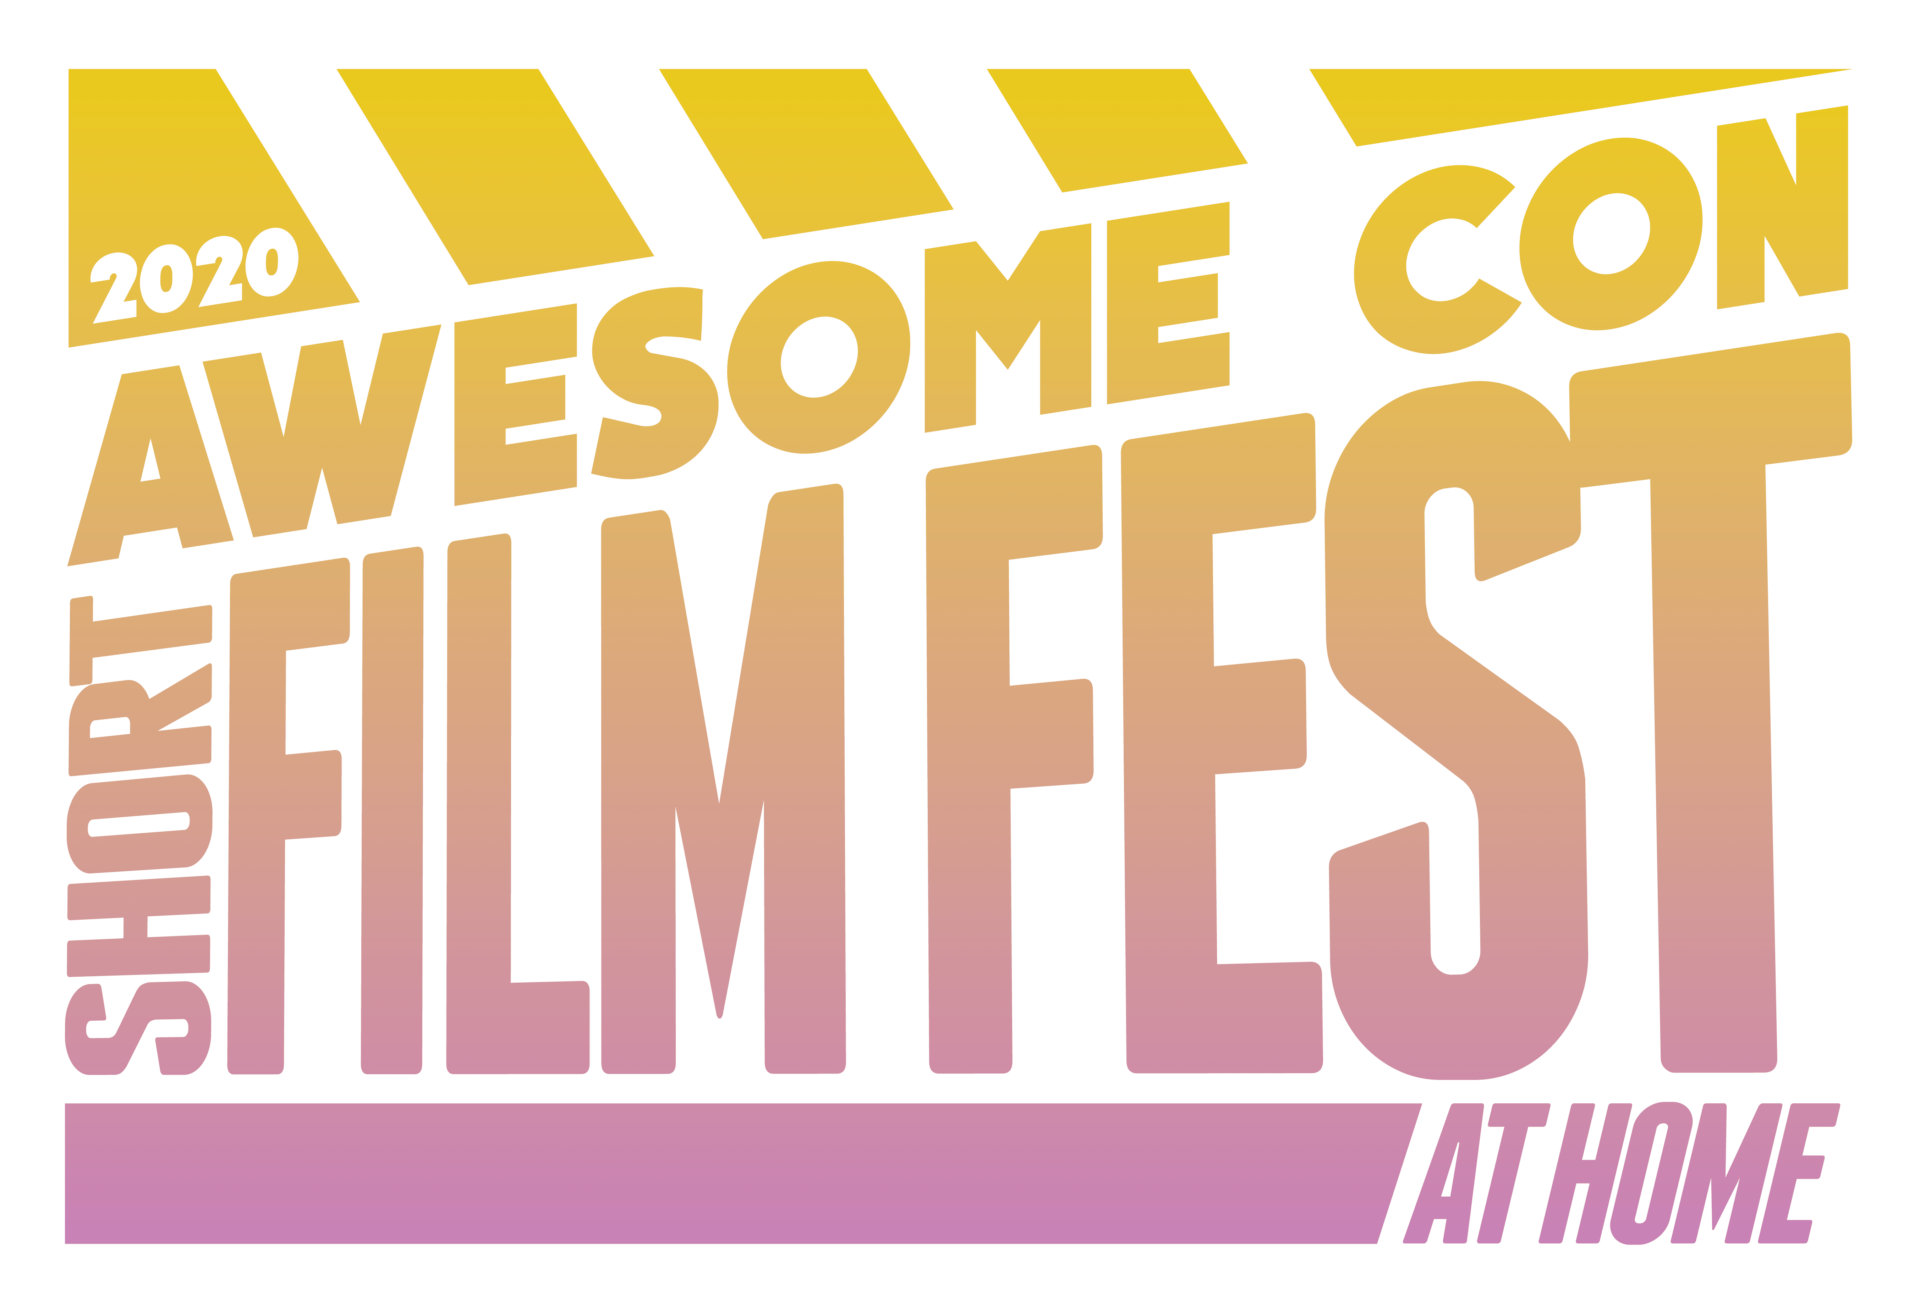 Awesome Con Short Film Fest (At Home)